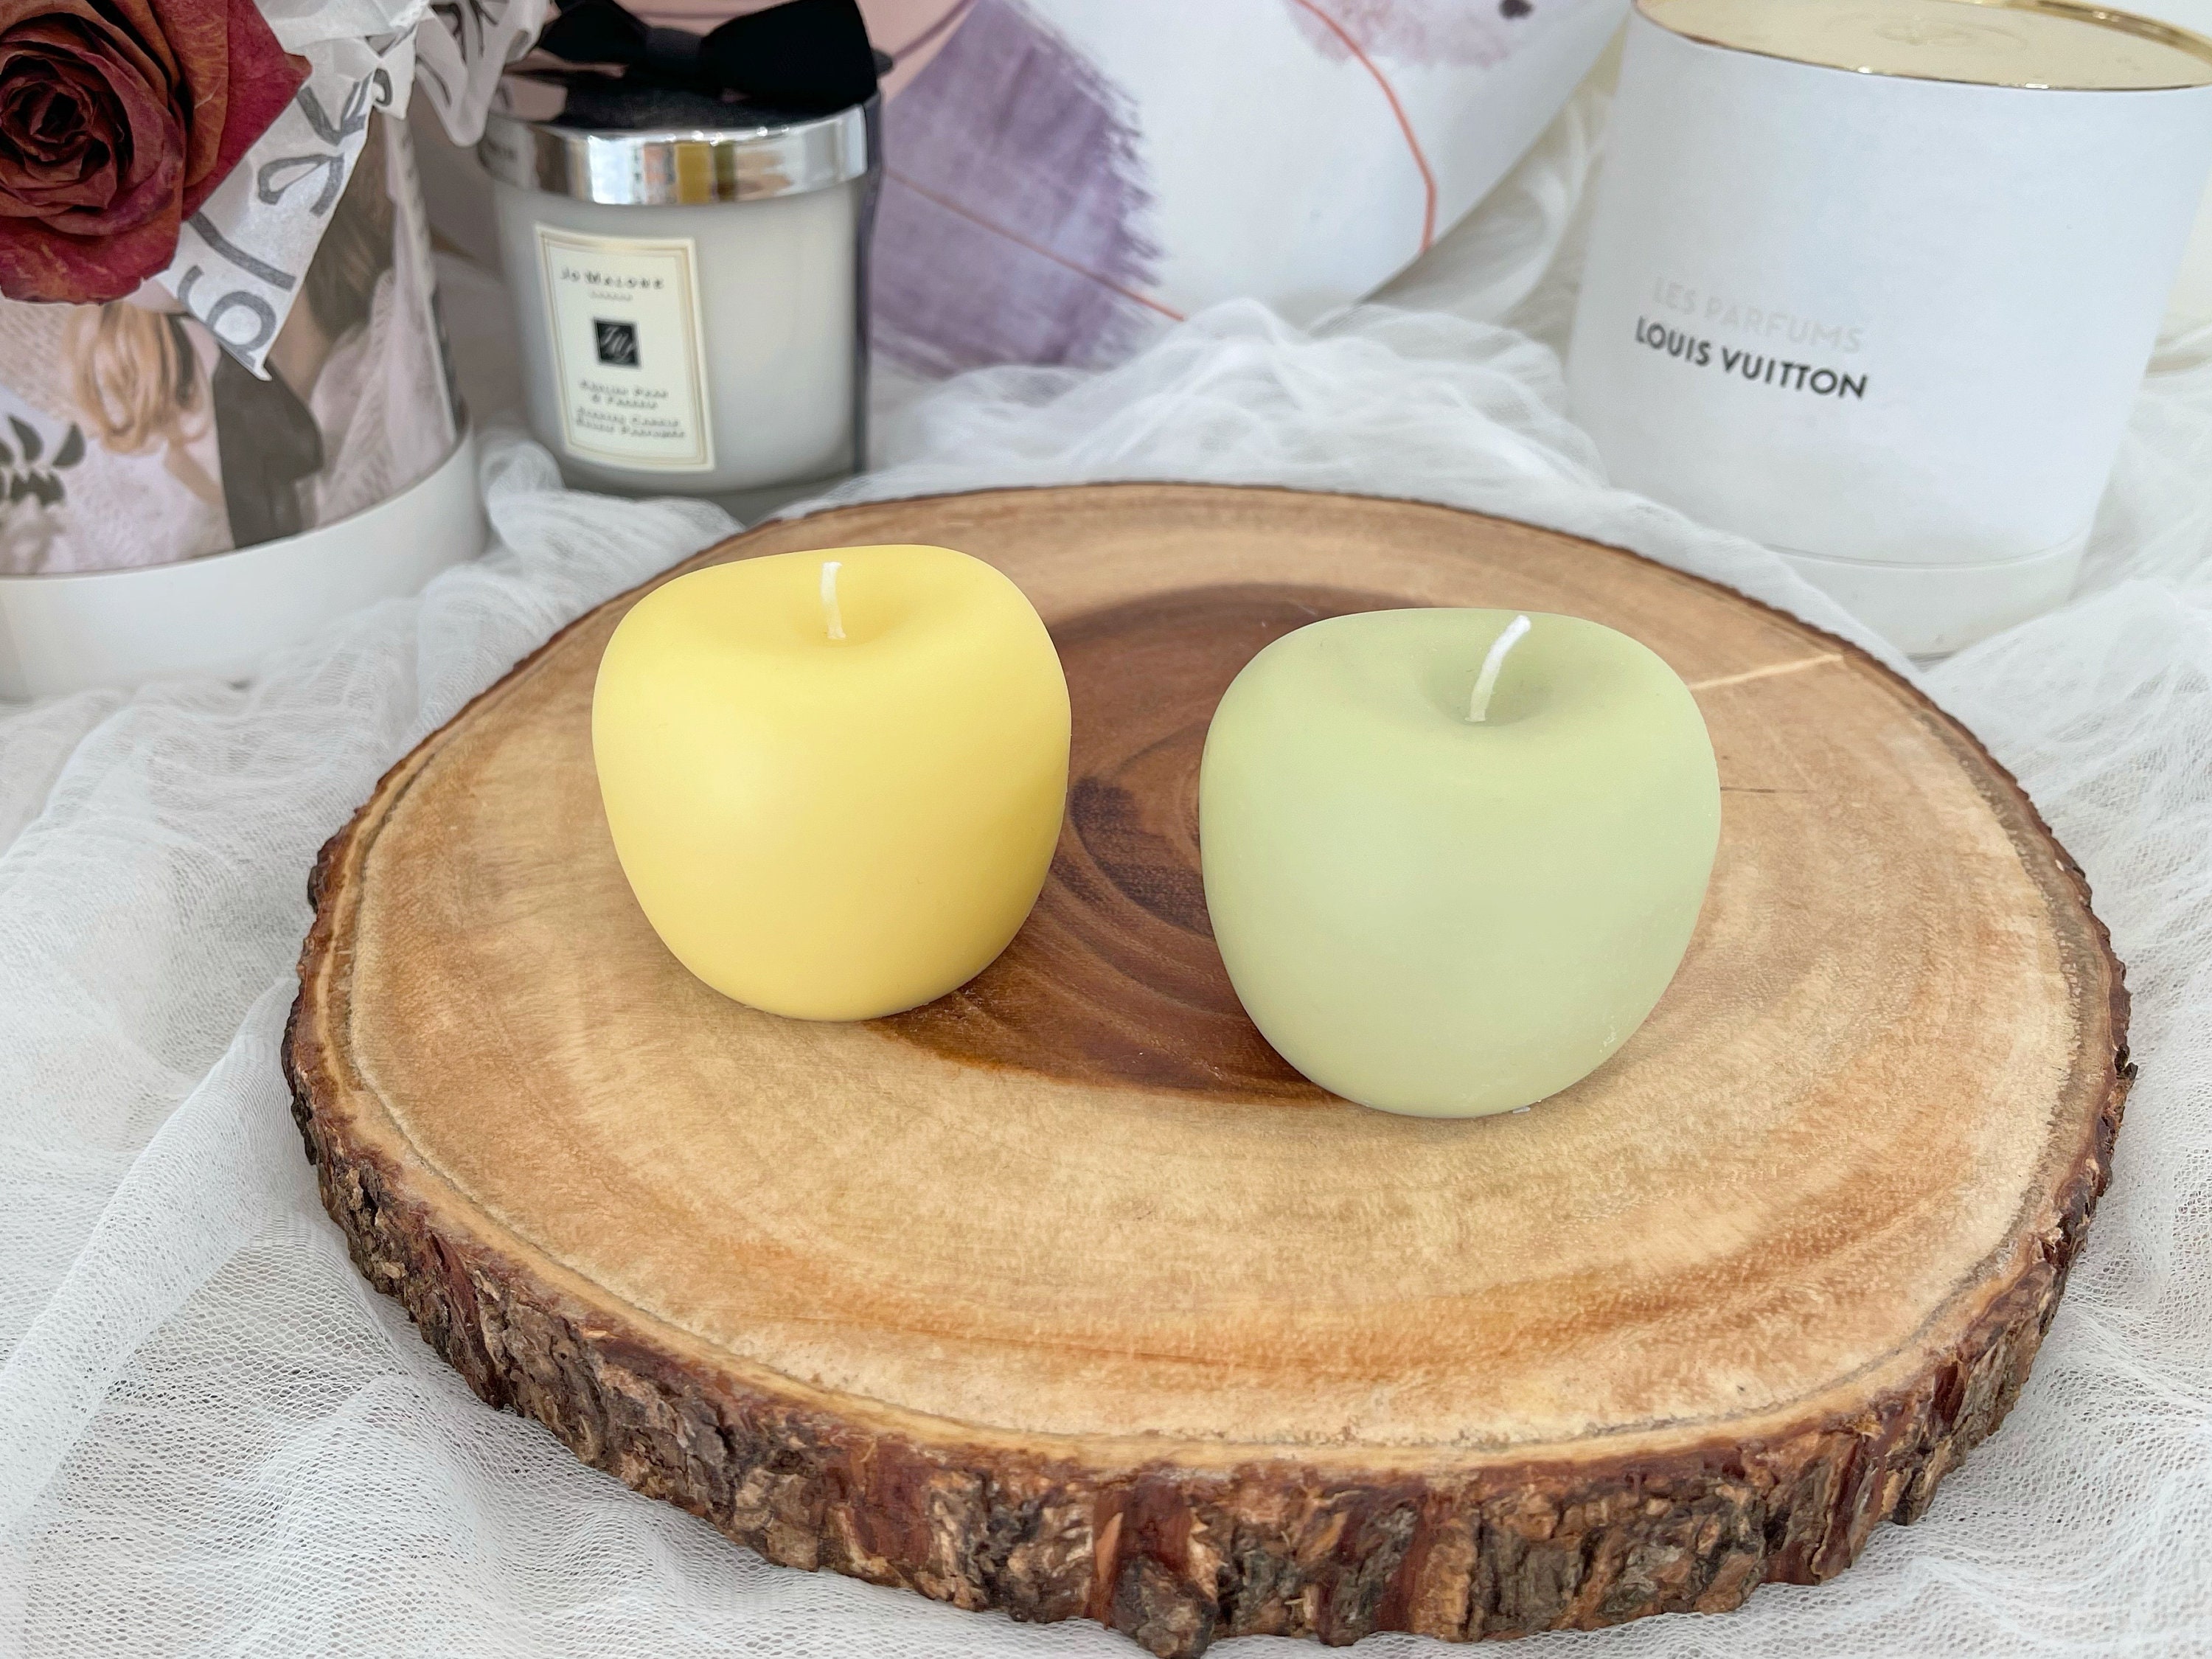 Pillar Candle Apple Candle Fruit Candle Home Decor Candle 